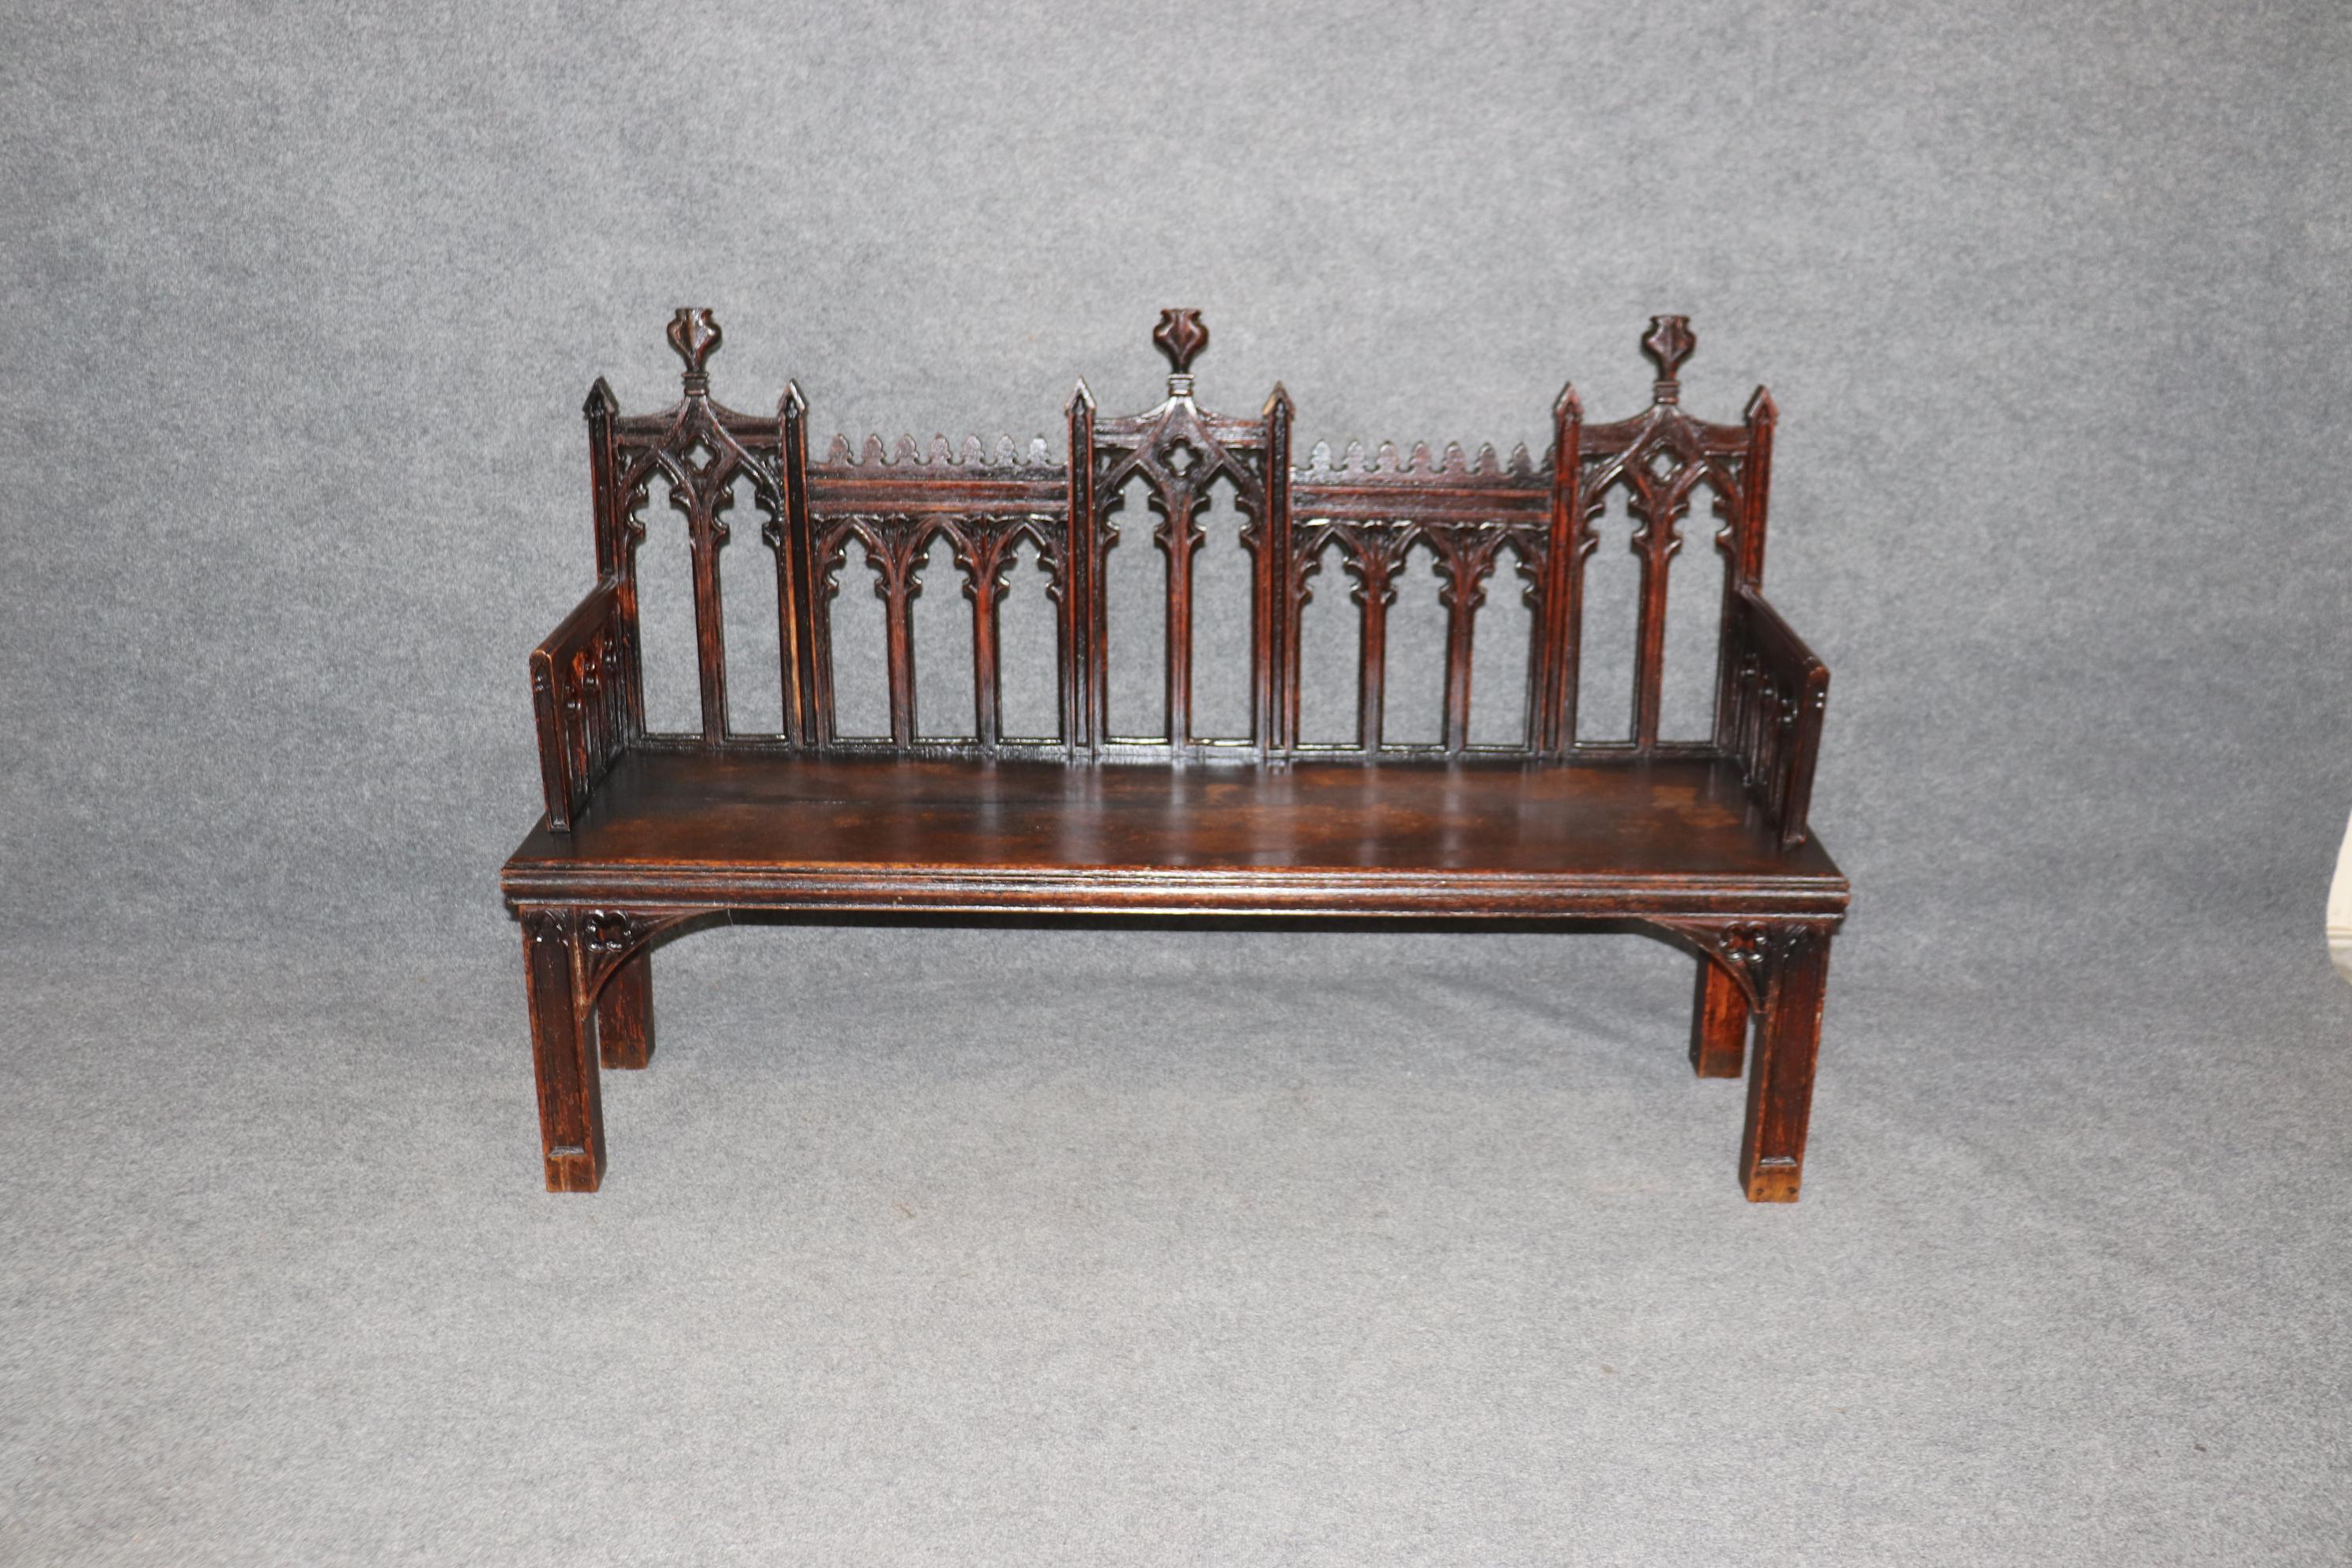 This is a superb and very unique form of Gothic bench from England. The bench features a dark oak finish with minor signs of age and use such as finish losses and minor wear. The bench would look stunning with a bright contrasting cushion of some